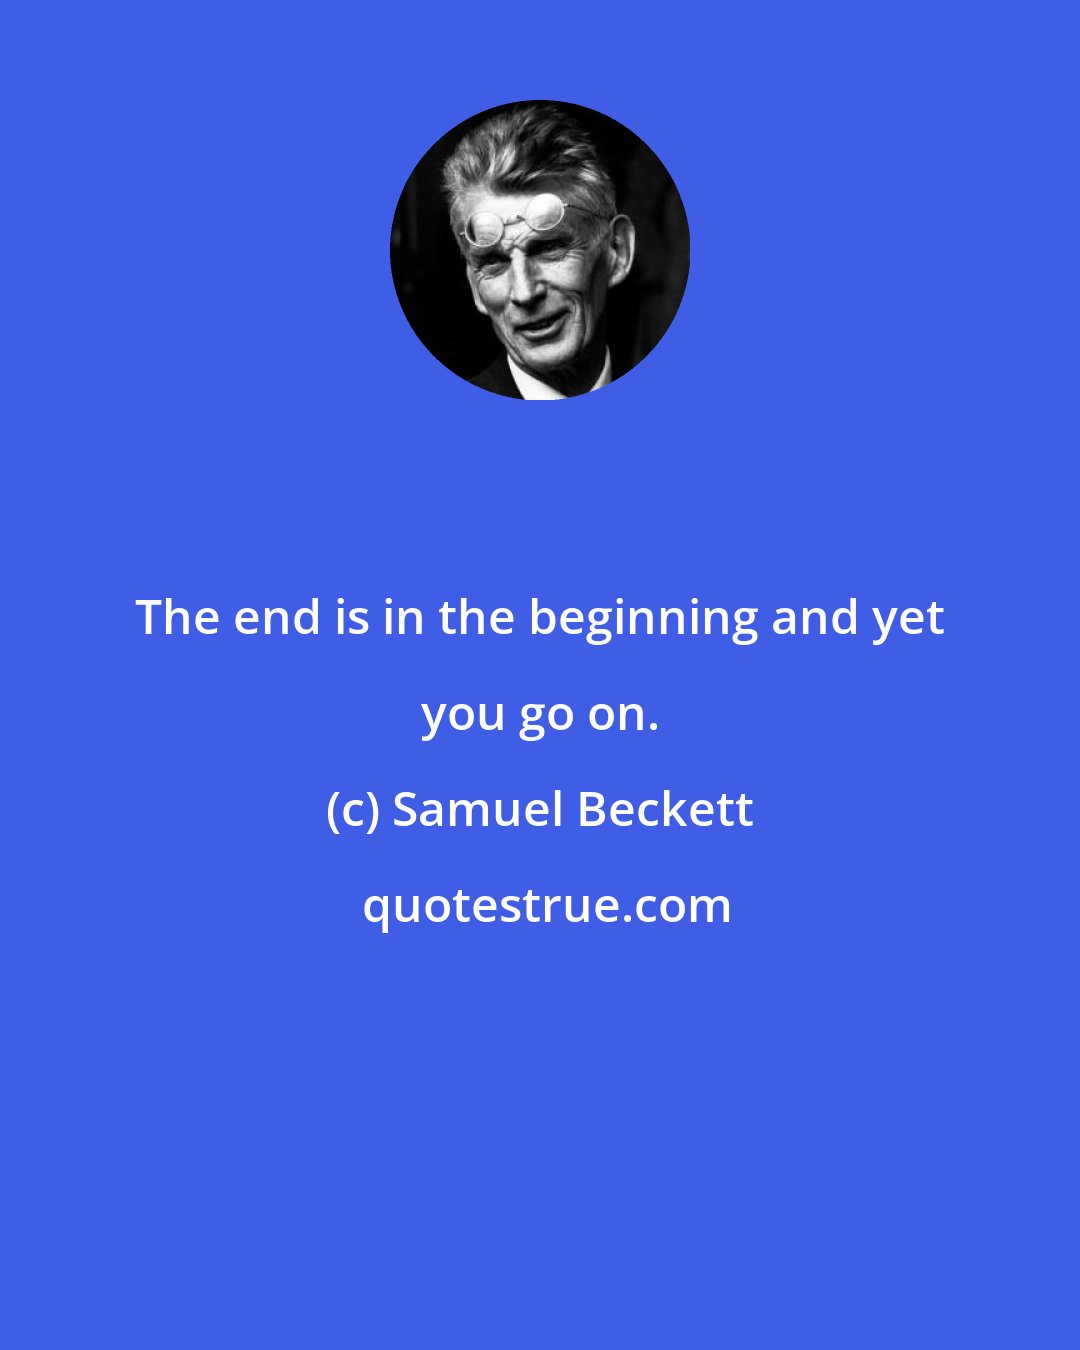 Samuel Beckett: The end is in the beginning and yet you go on.